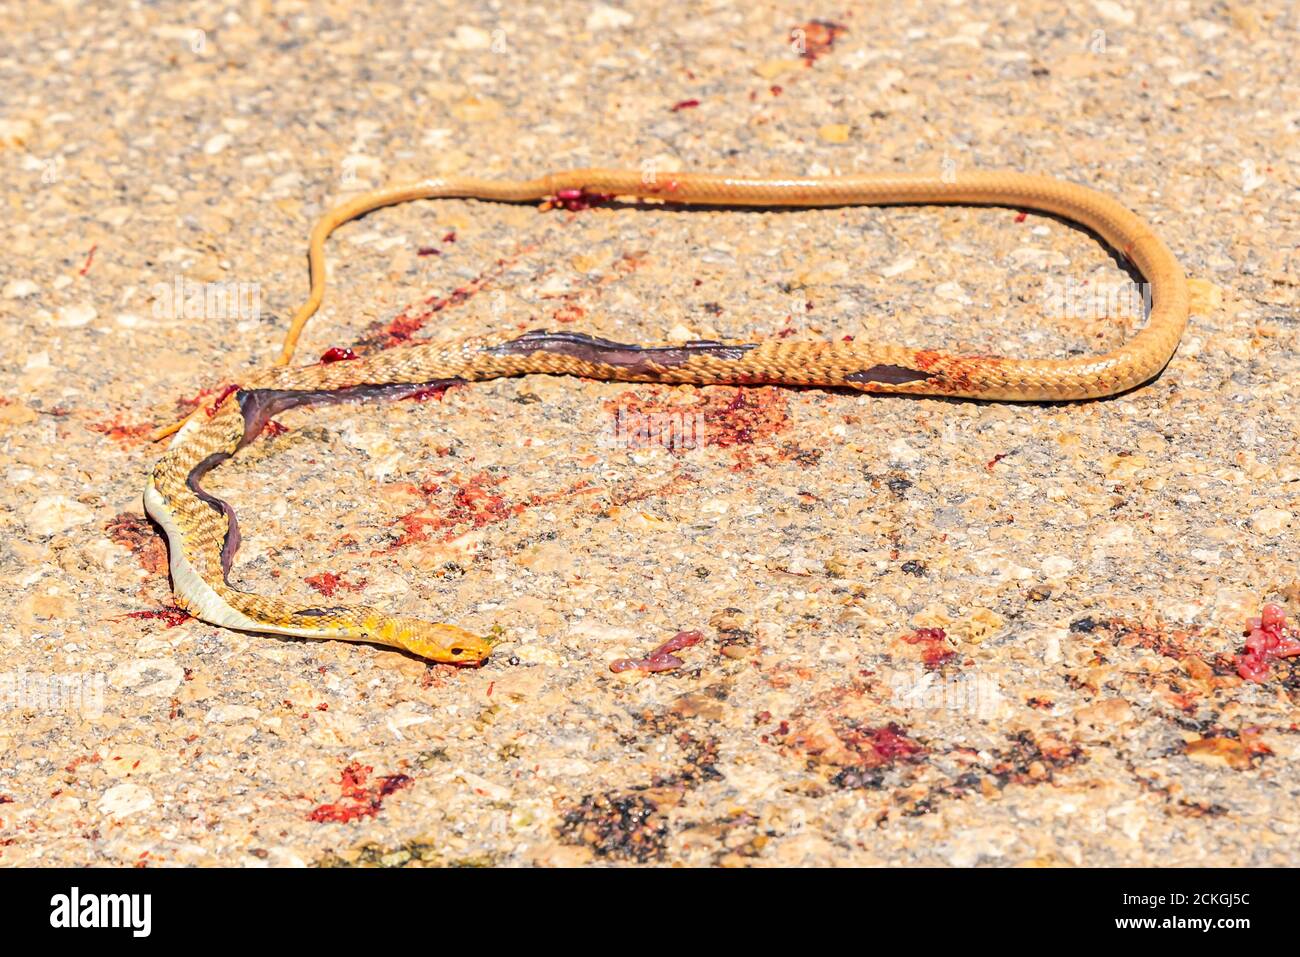 Roadkill. a snake was run over by a vehicle on a road in the Negev Desert, Israel Stock Photo